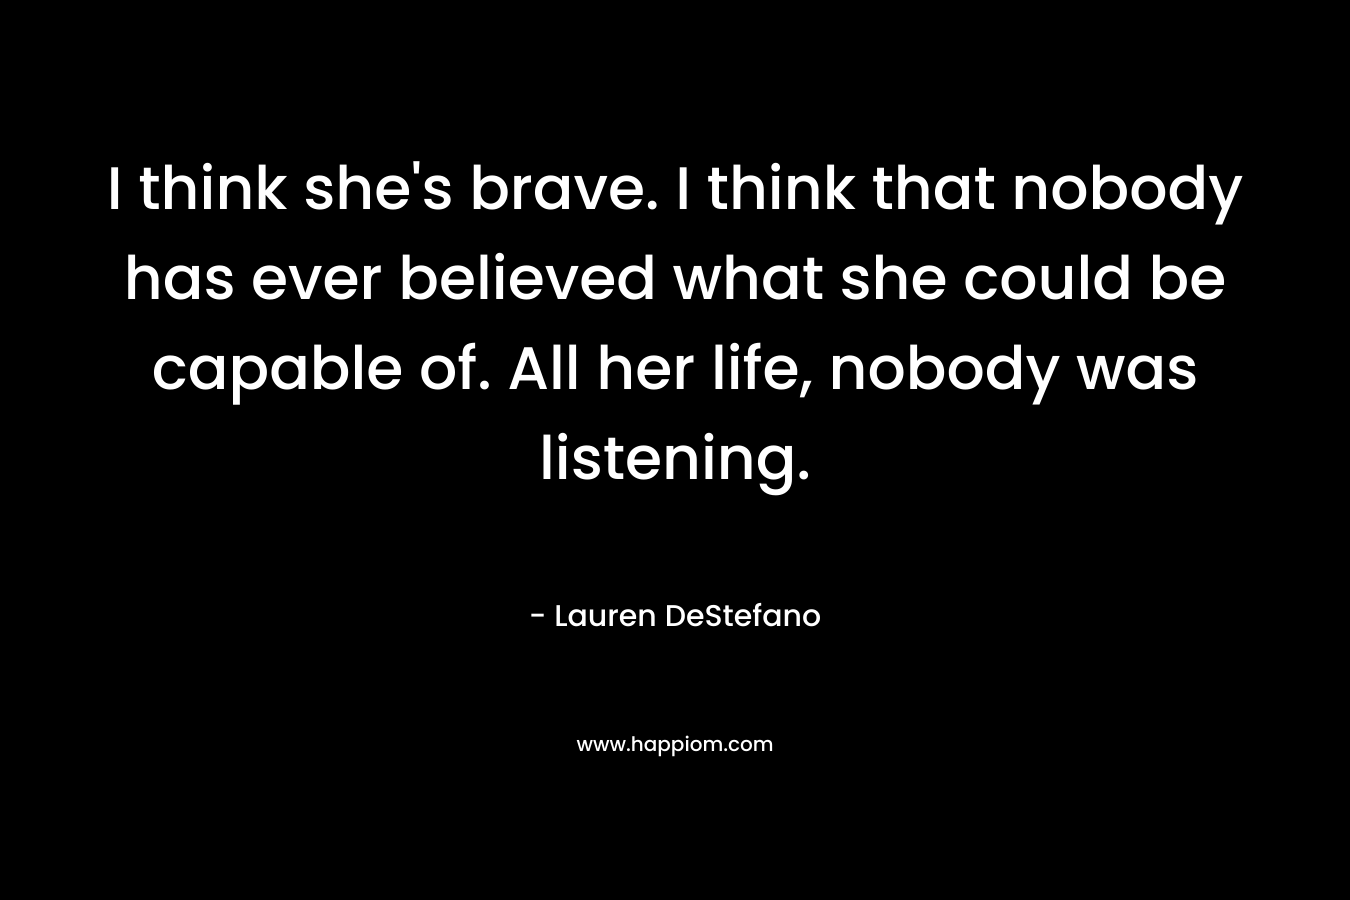 I think she's brave. I think that nobody has ever believed what she could be capable of. All her life, nobody was listening.